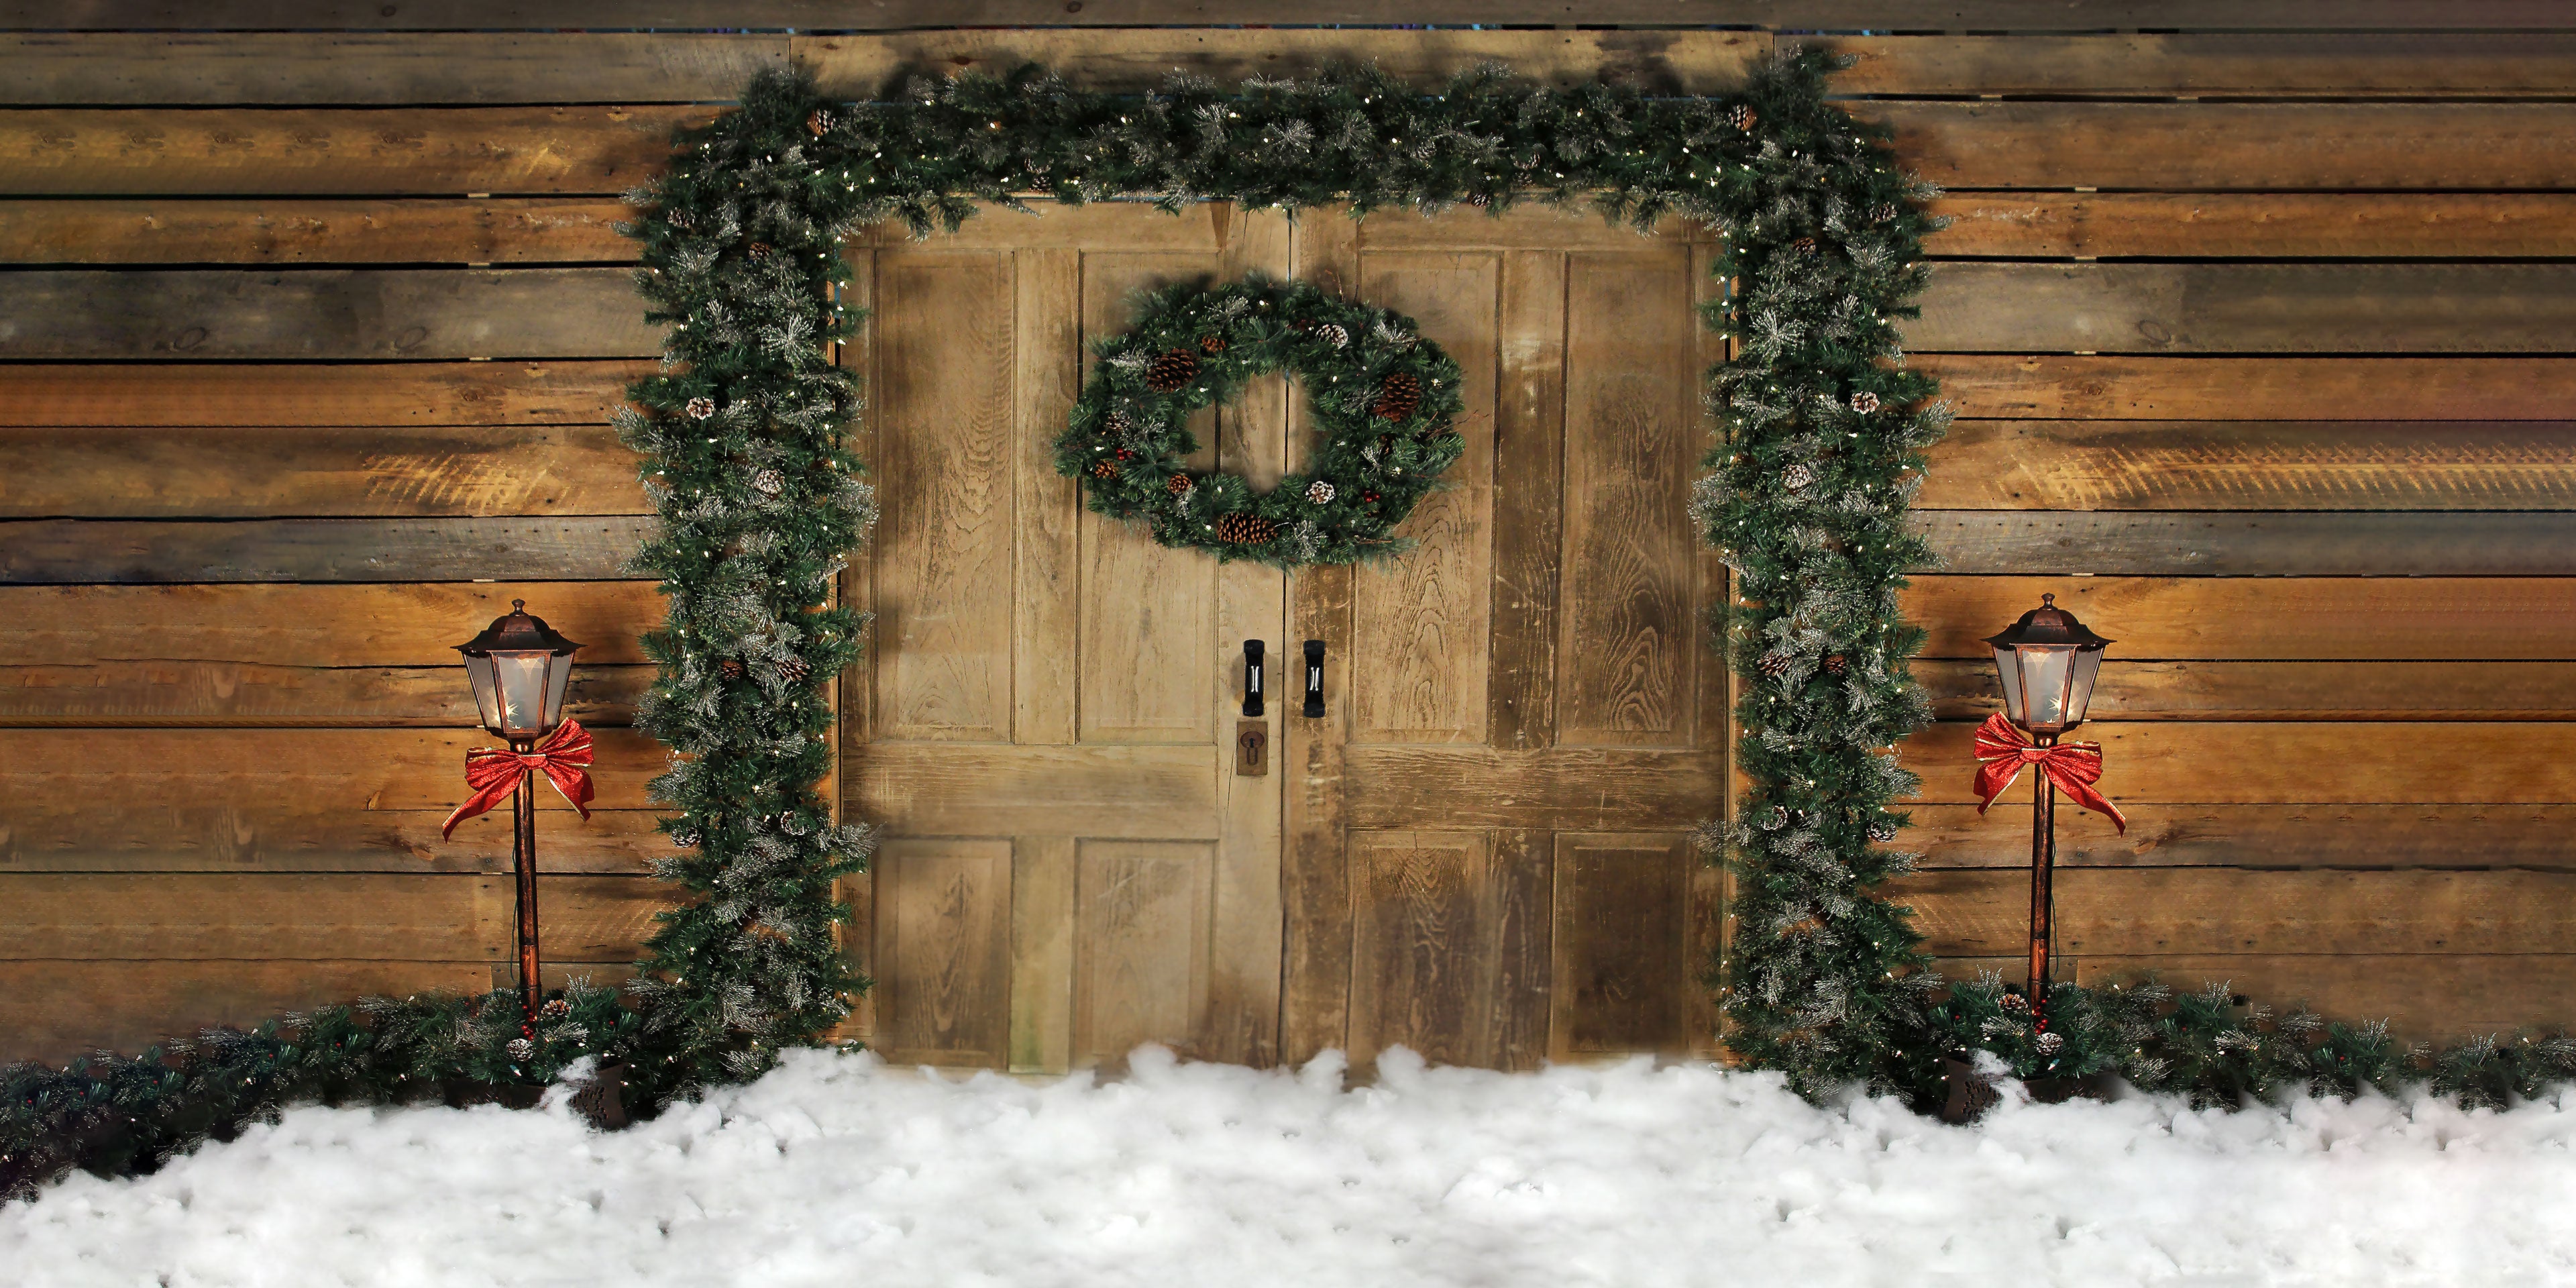 Kate Holiday Door Christmas Wreath Backdrop designed by Arica Kirby